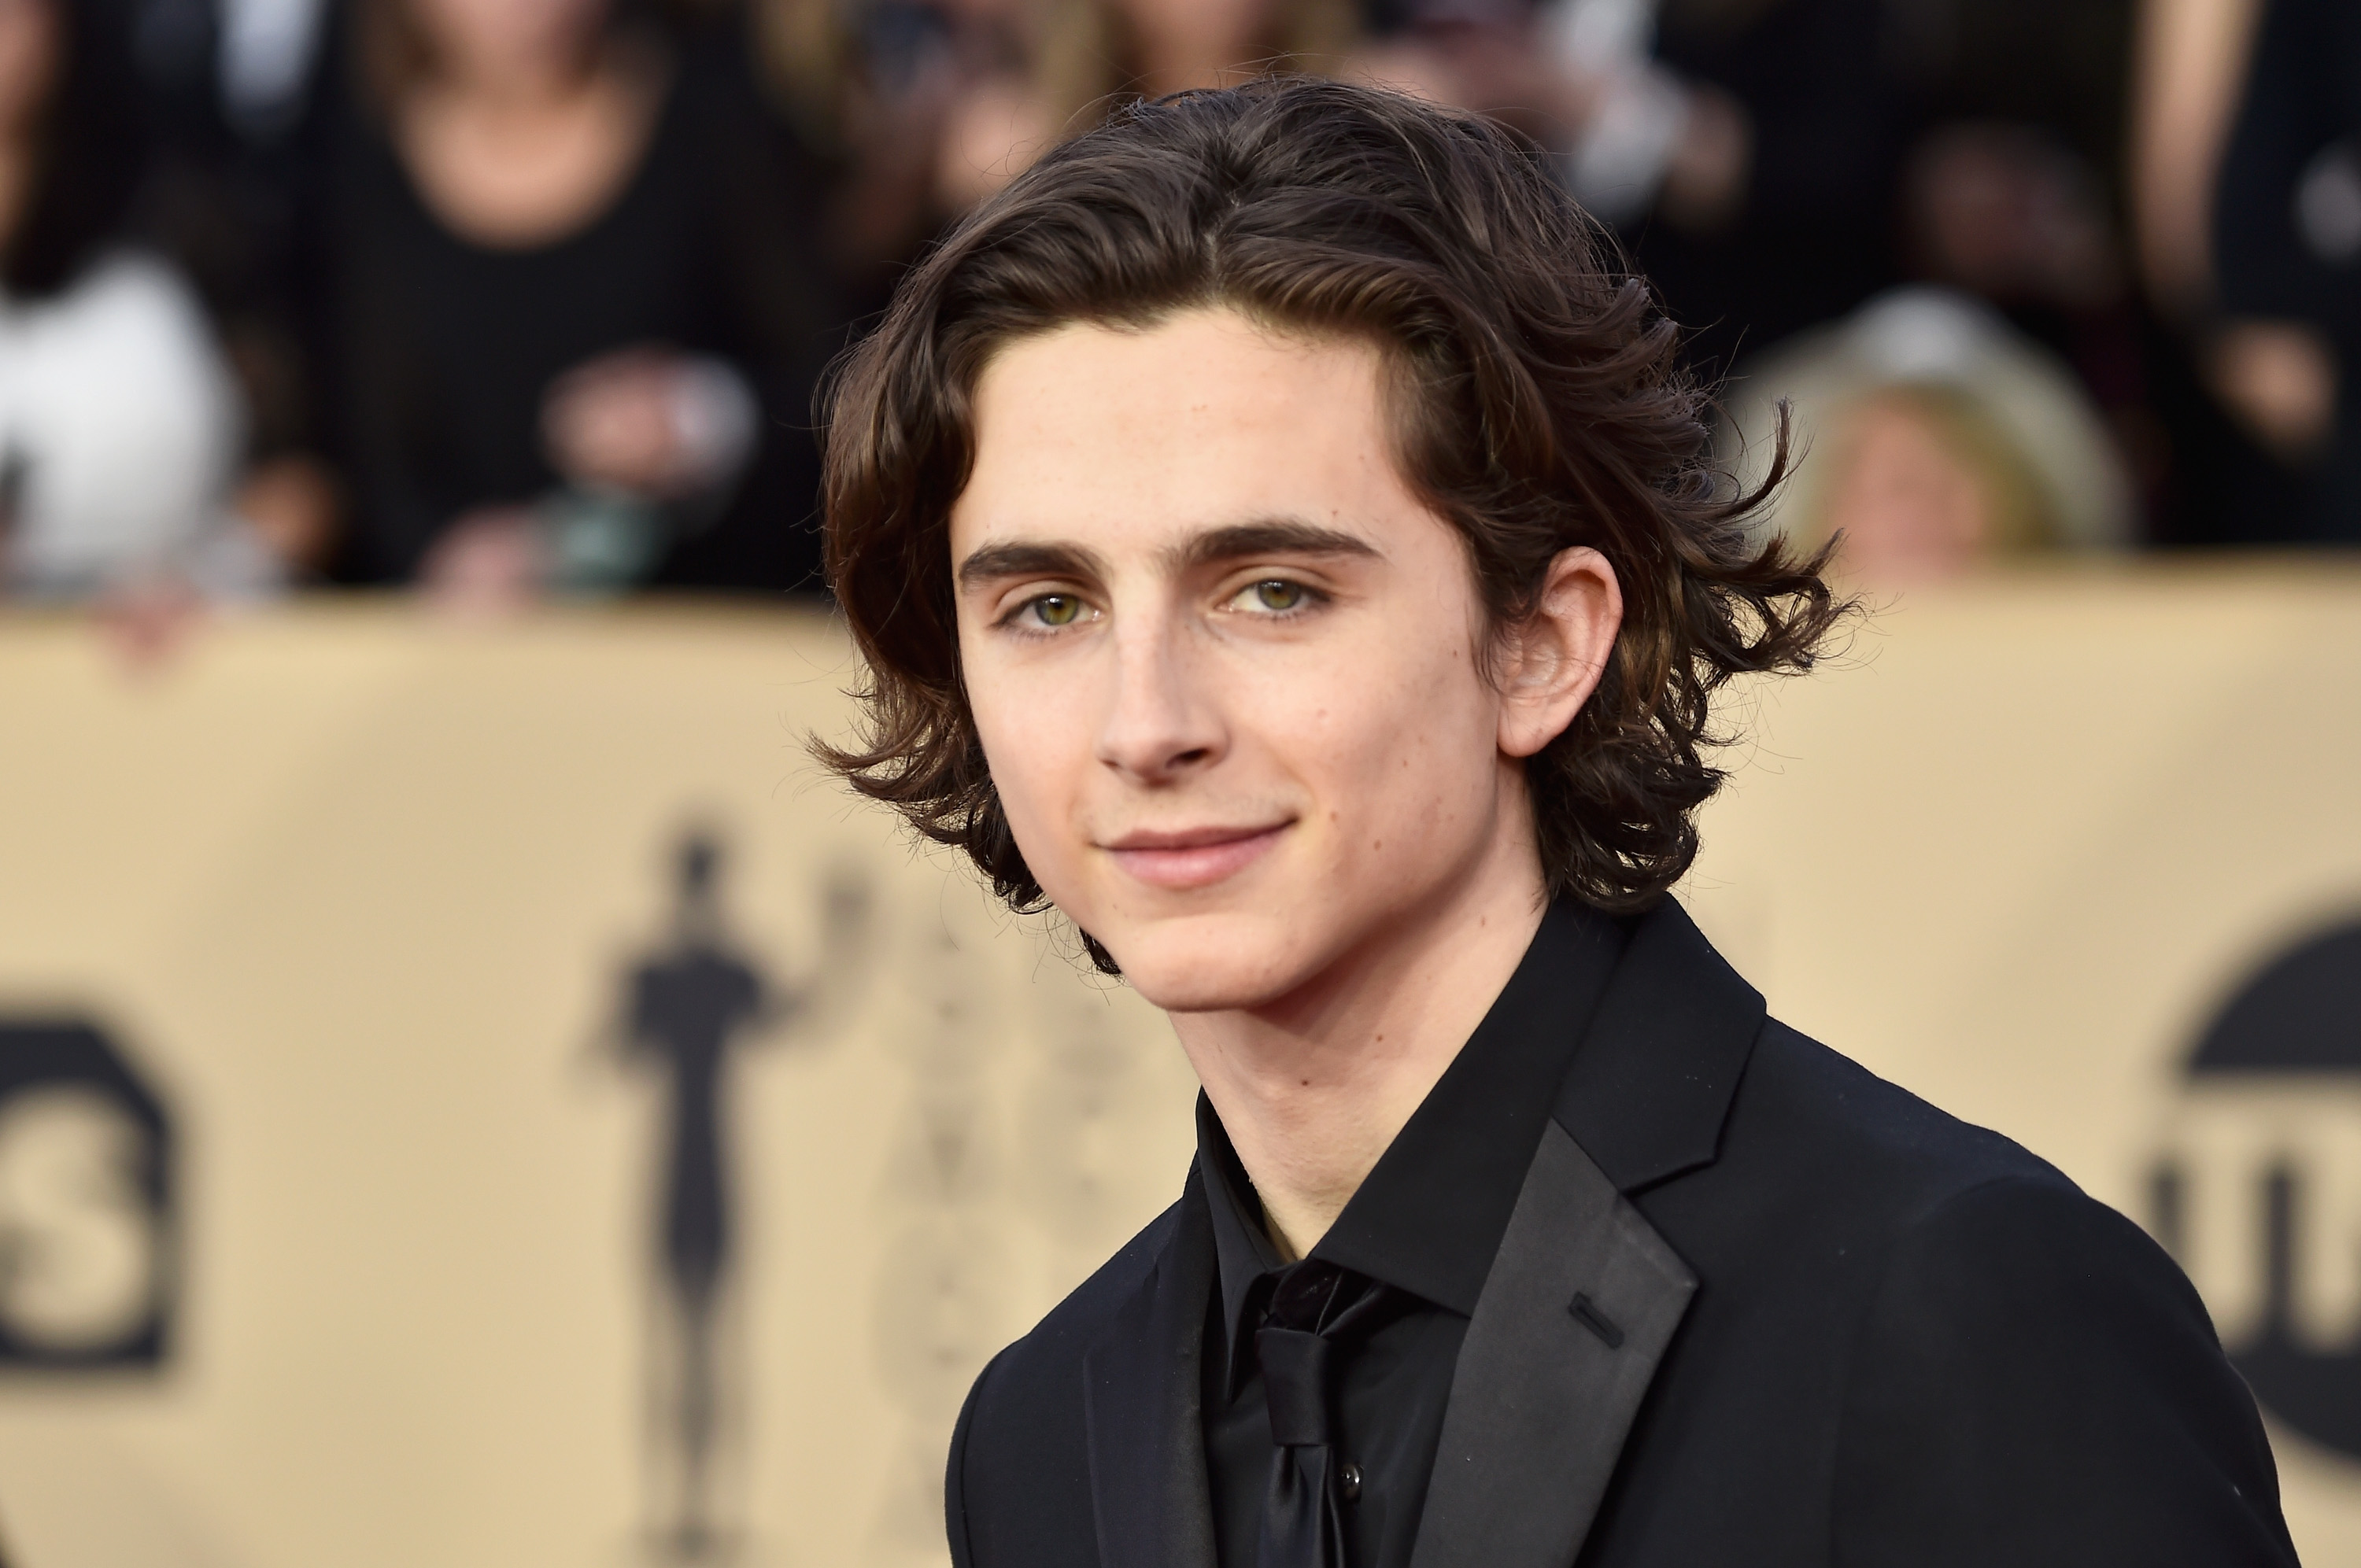 Timothy Chalamet at the 24th Annual Screen Actors Guild Awards at The Shrine Auditorium on January 21, 2018 in Los Angeles, California | Source: Getty Images